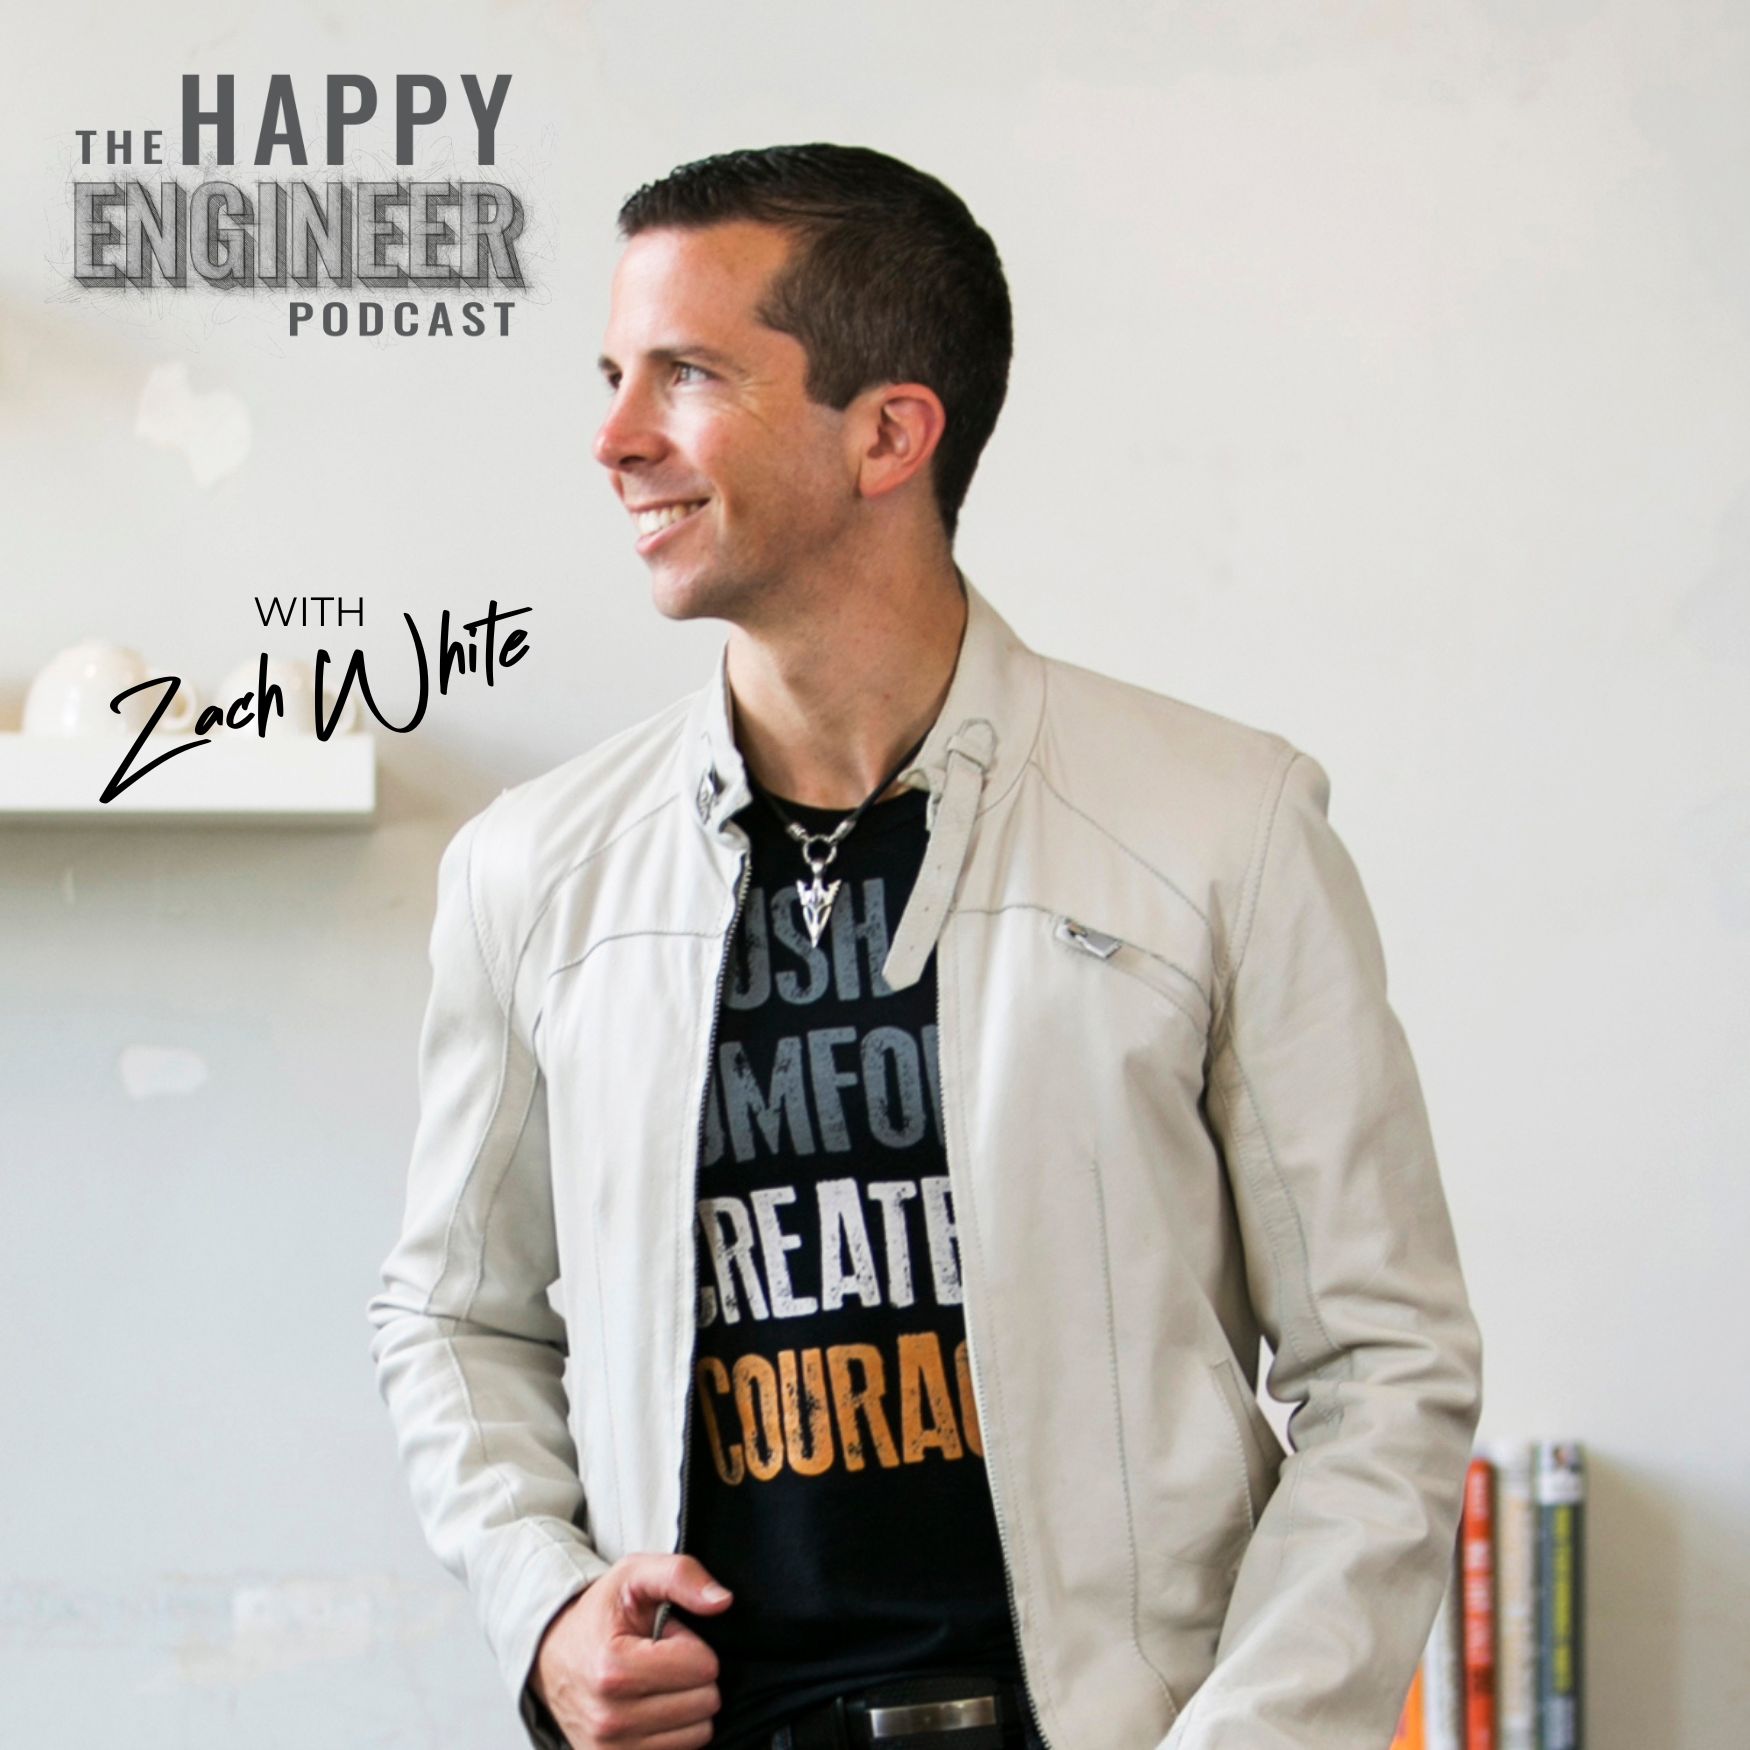 The Happy Engineer Podcast with Zach White on Networking for Engineers